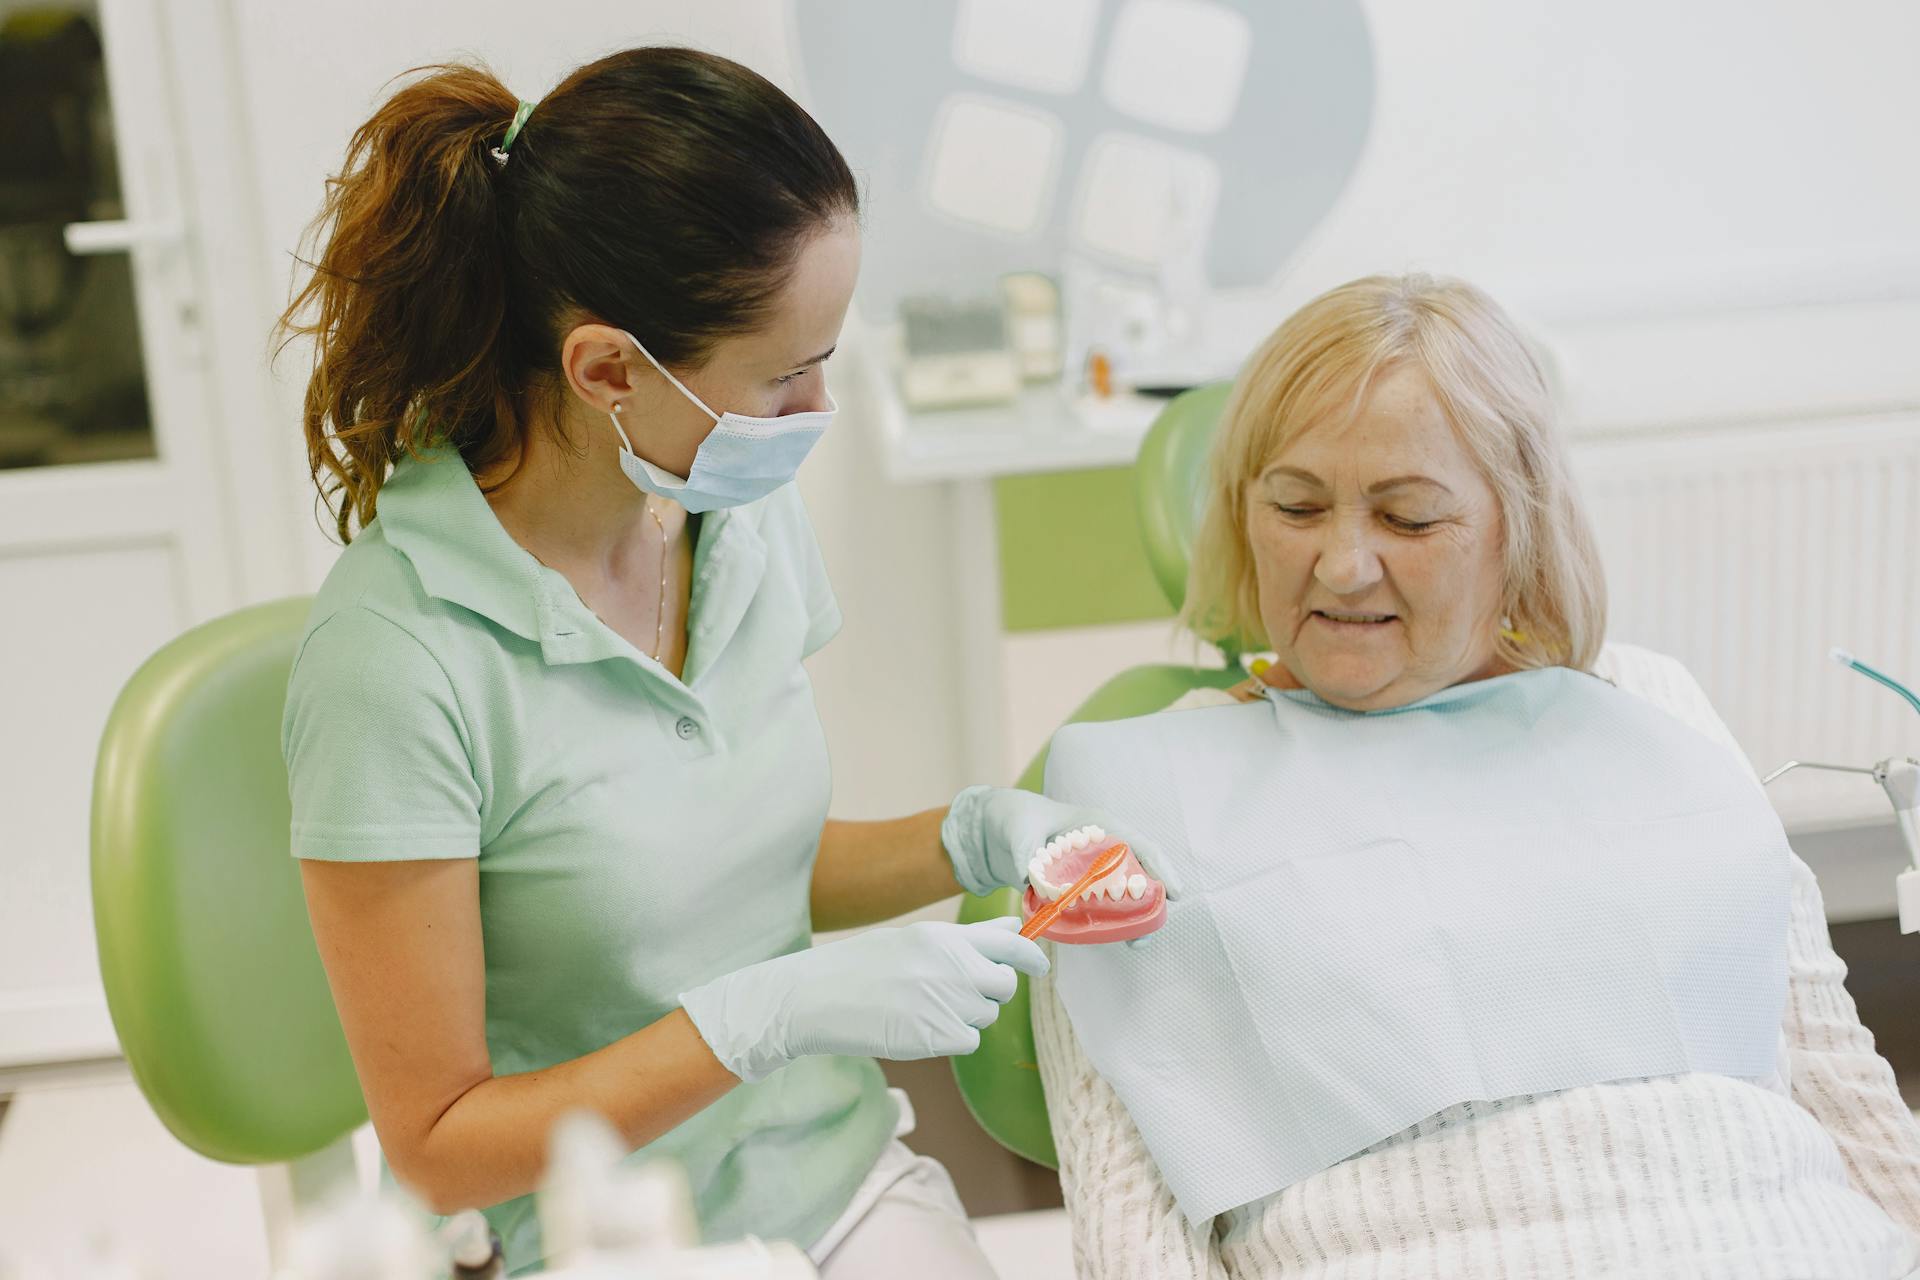 Is There a Connection Between the Number of Teeth, Income and Dementia?